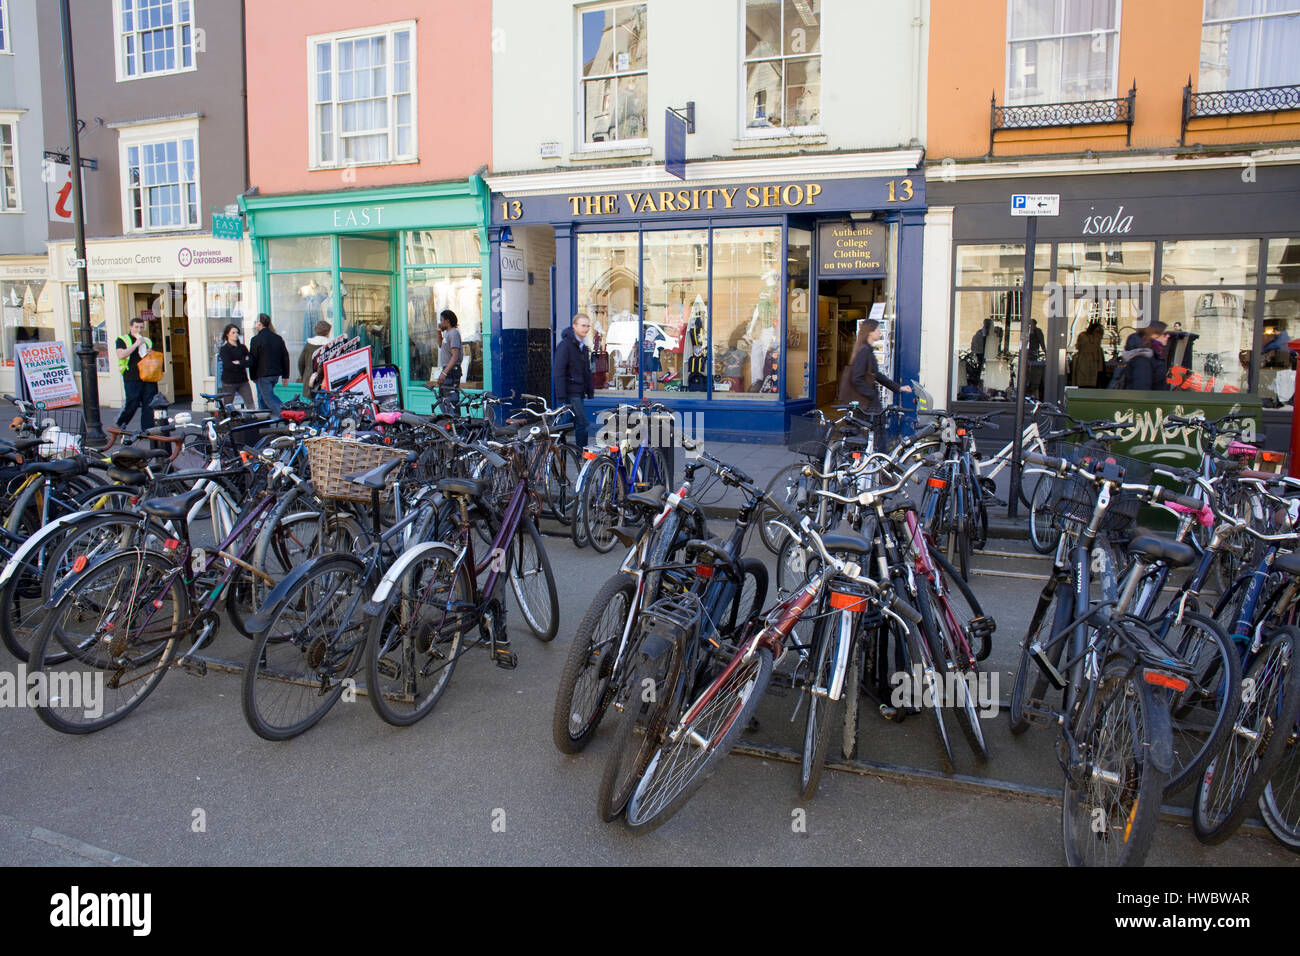 Bicycles parked outside the varsity shop in Oxford Stock Photo